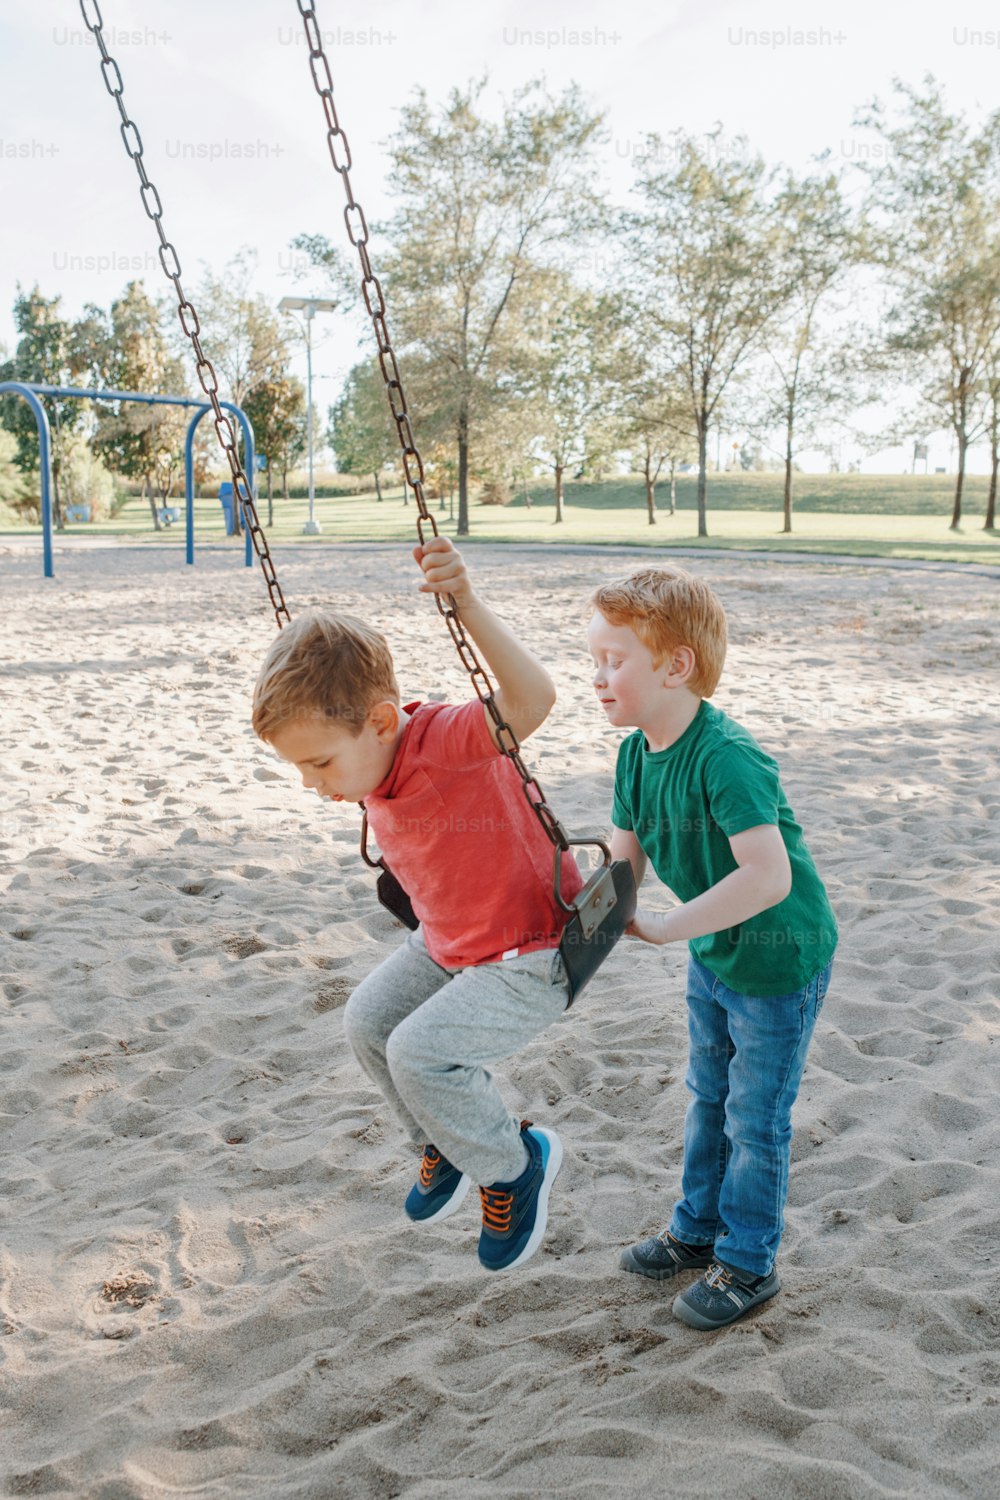 Happy smiling little preschool boys friends swinging on swings at playground outside on summer day. Happy childhood lifestyle concept. Seasonal outdoor activity for kids.